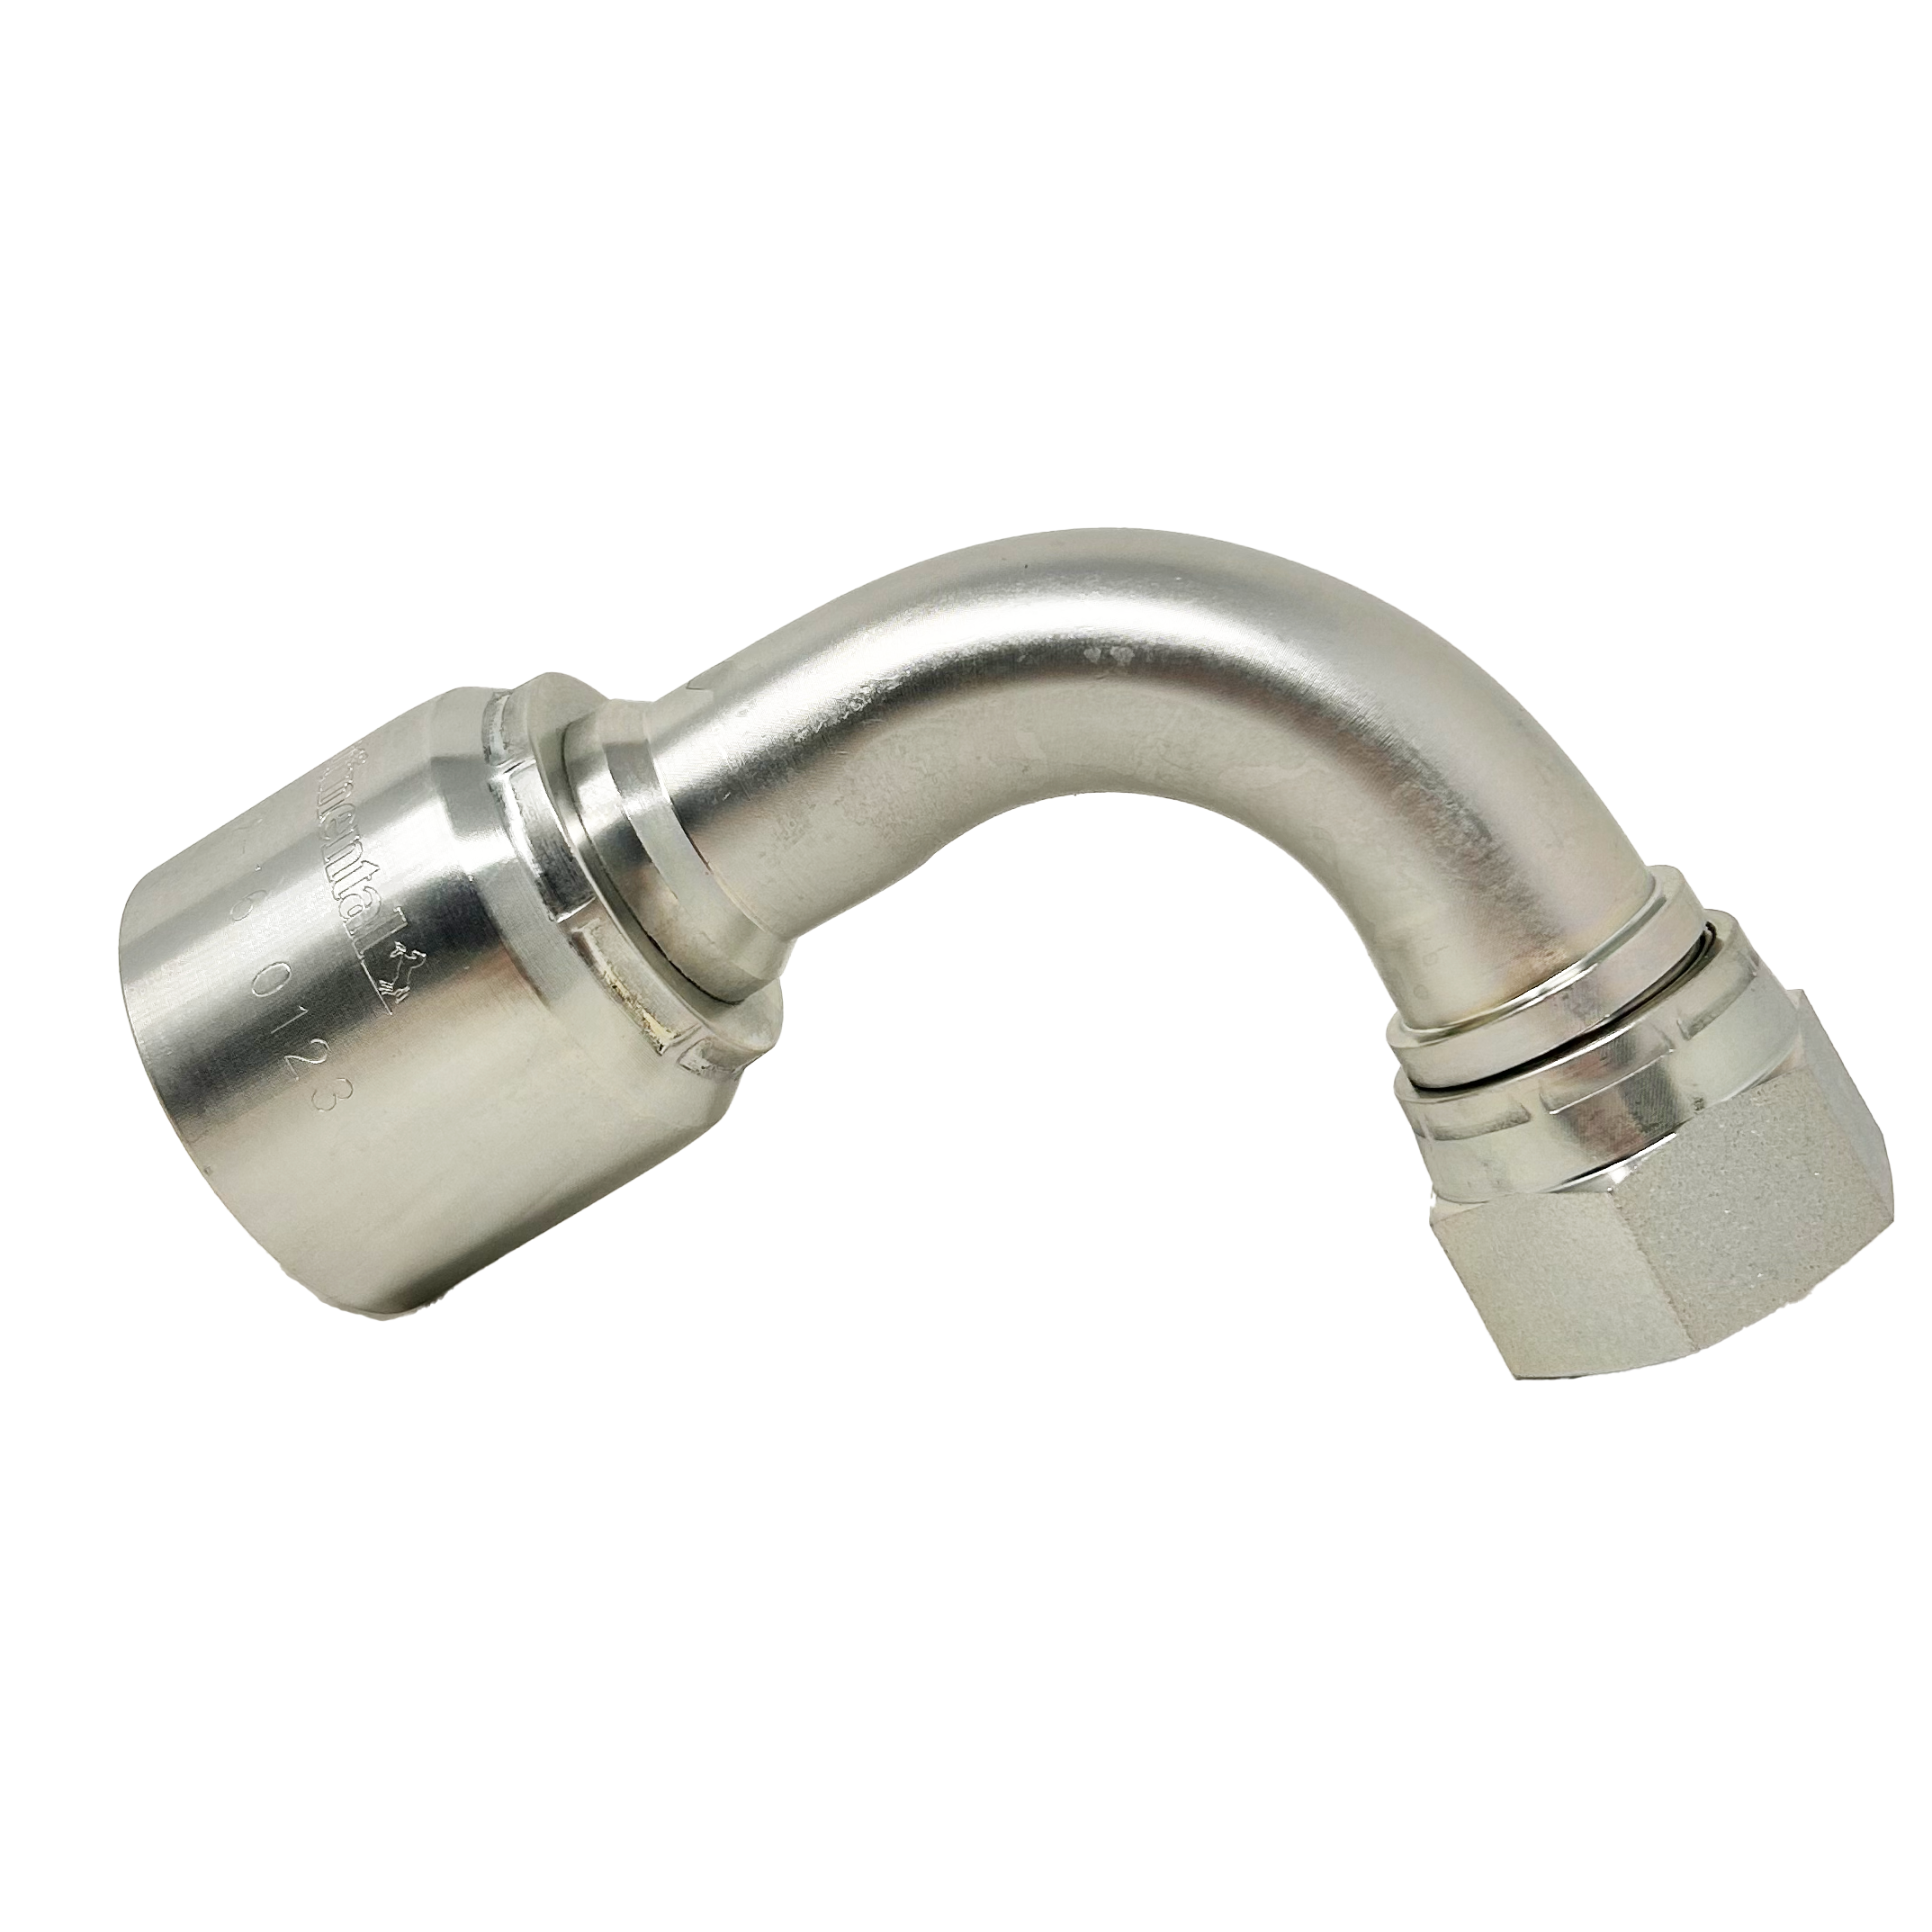 B2-JCFX90-0505: Continental Hose Fitting, 0.3125 (5/16") Hose ID x 1/2-20 Female JIC, 90-Degree Swivel Connection